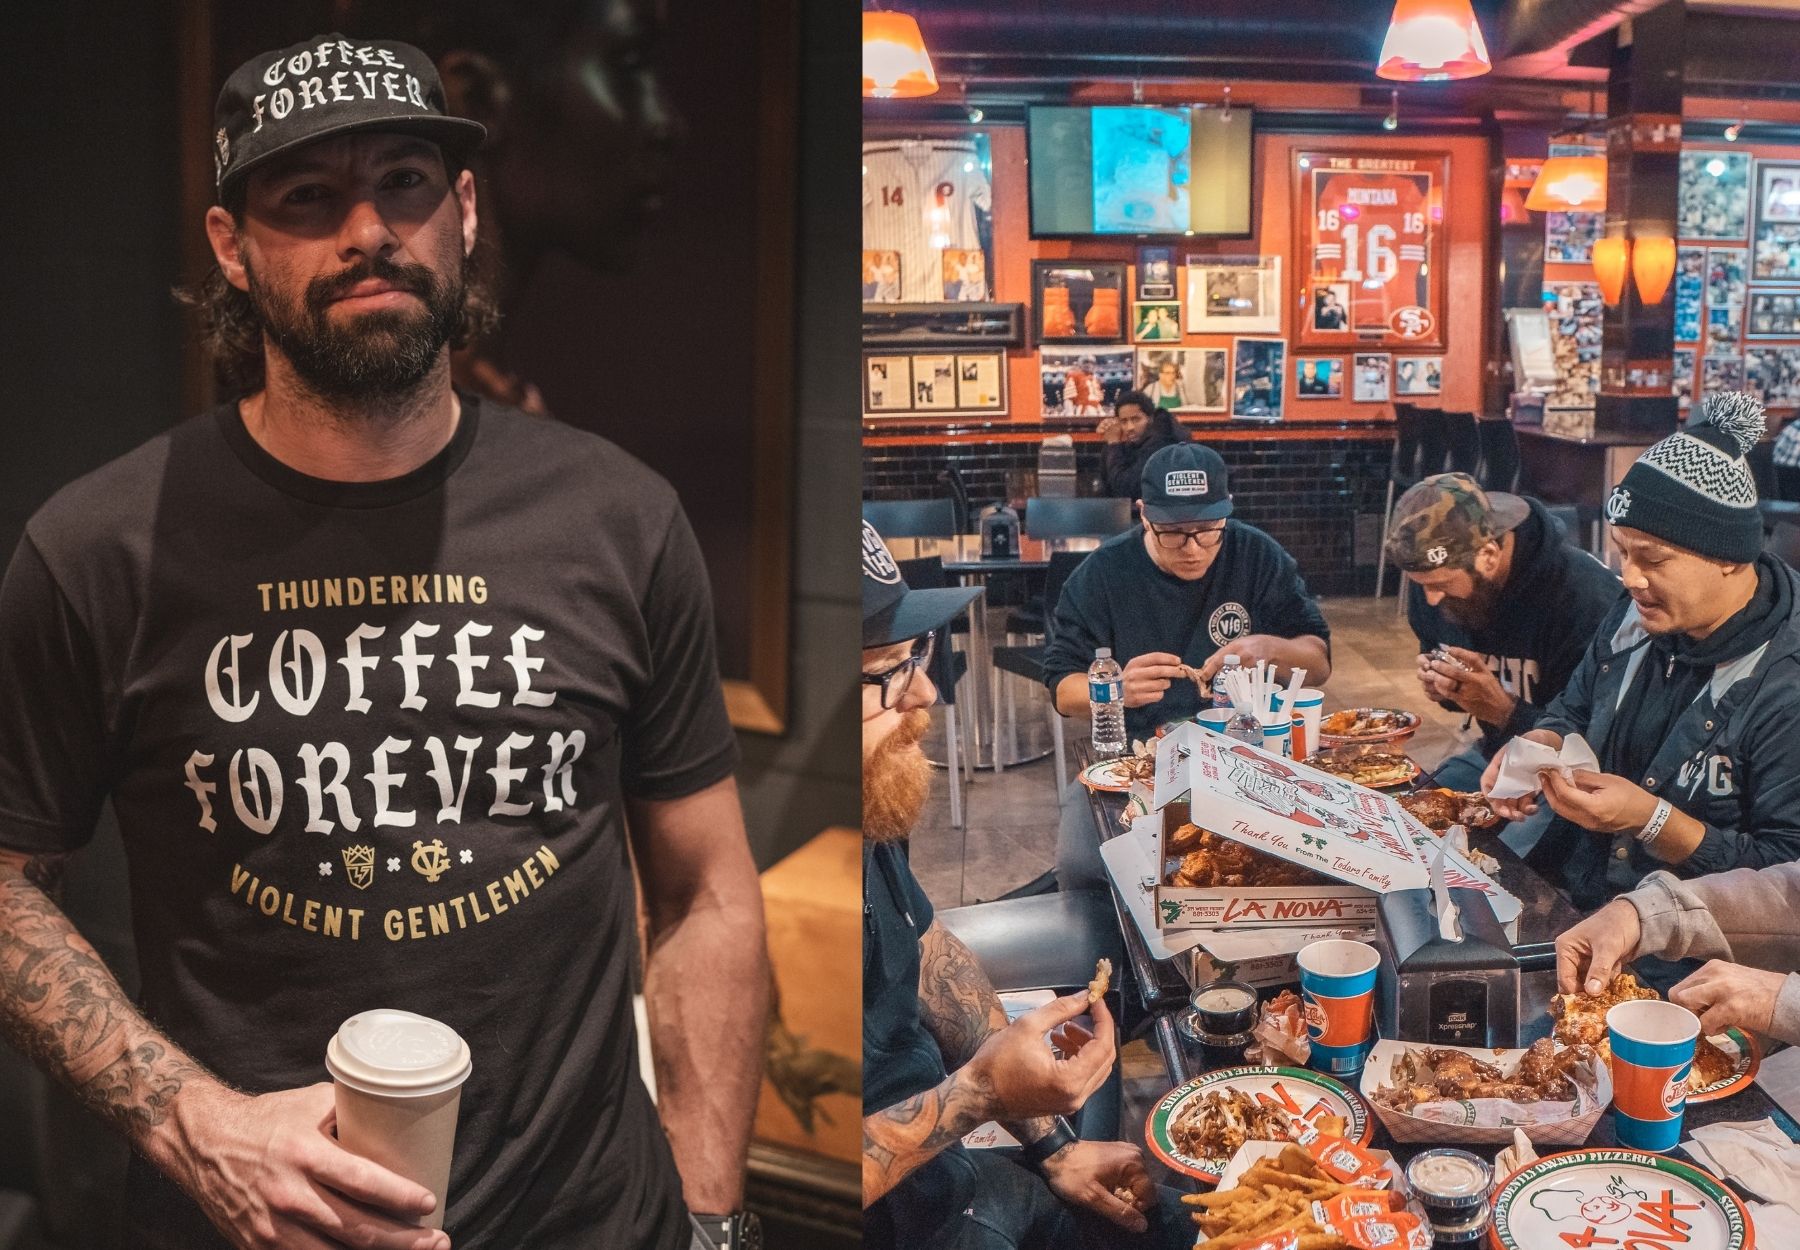 Join Orquest aedelweiss and their friends at Thunderking for a cup of coffee anytime. Or join them for one of their favorite food items, pizza, at La Nova in Buffalo, NY.